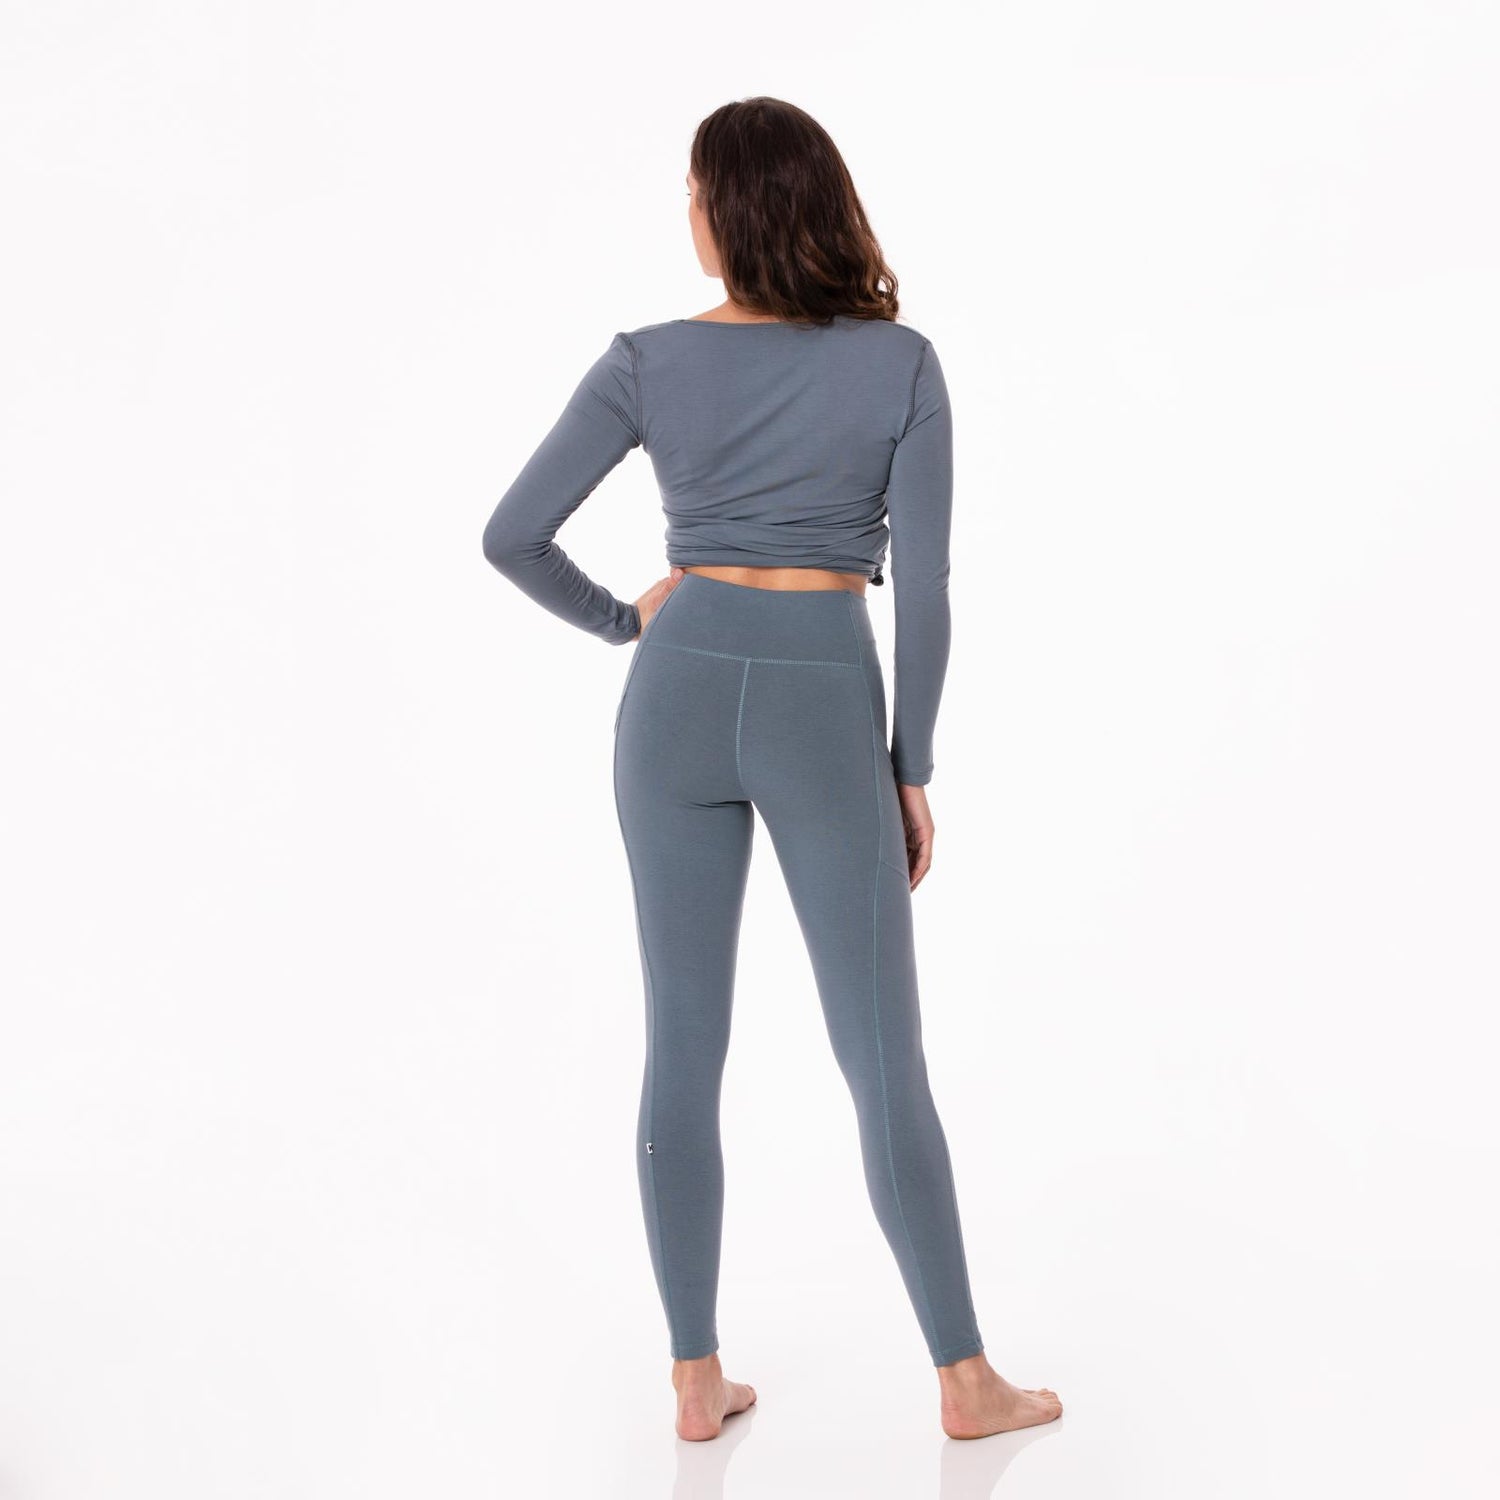 Women's Solid Luxe Stretch Leggings with Pockets in Slate